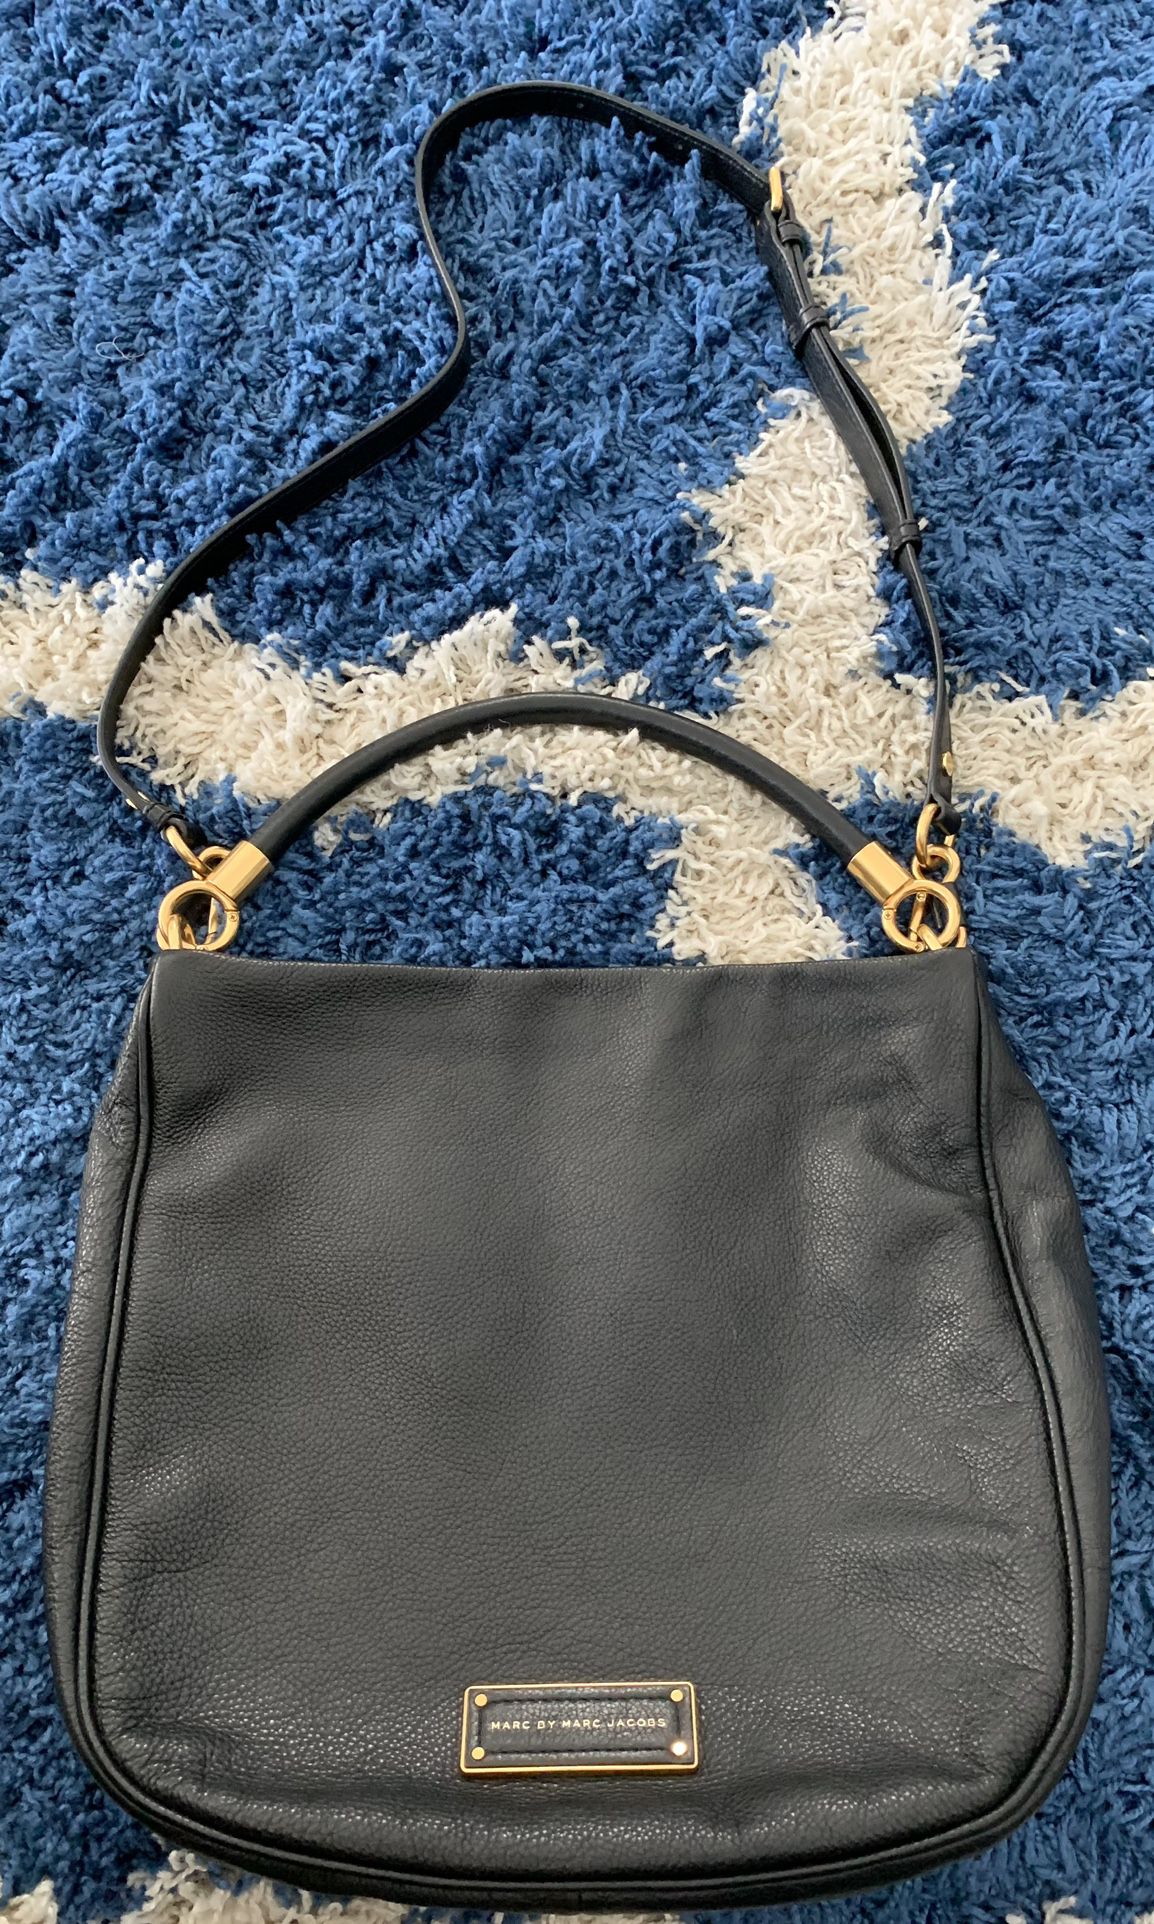 MARC by Marc Jacobs Hobo Bag